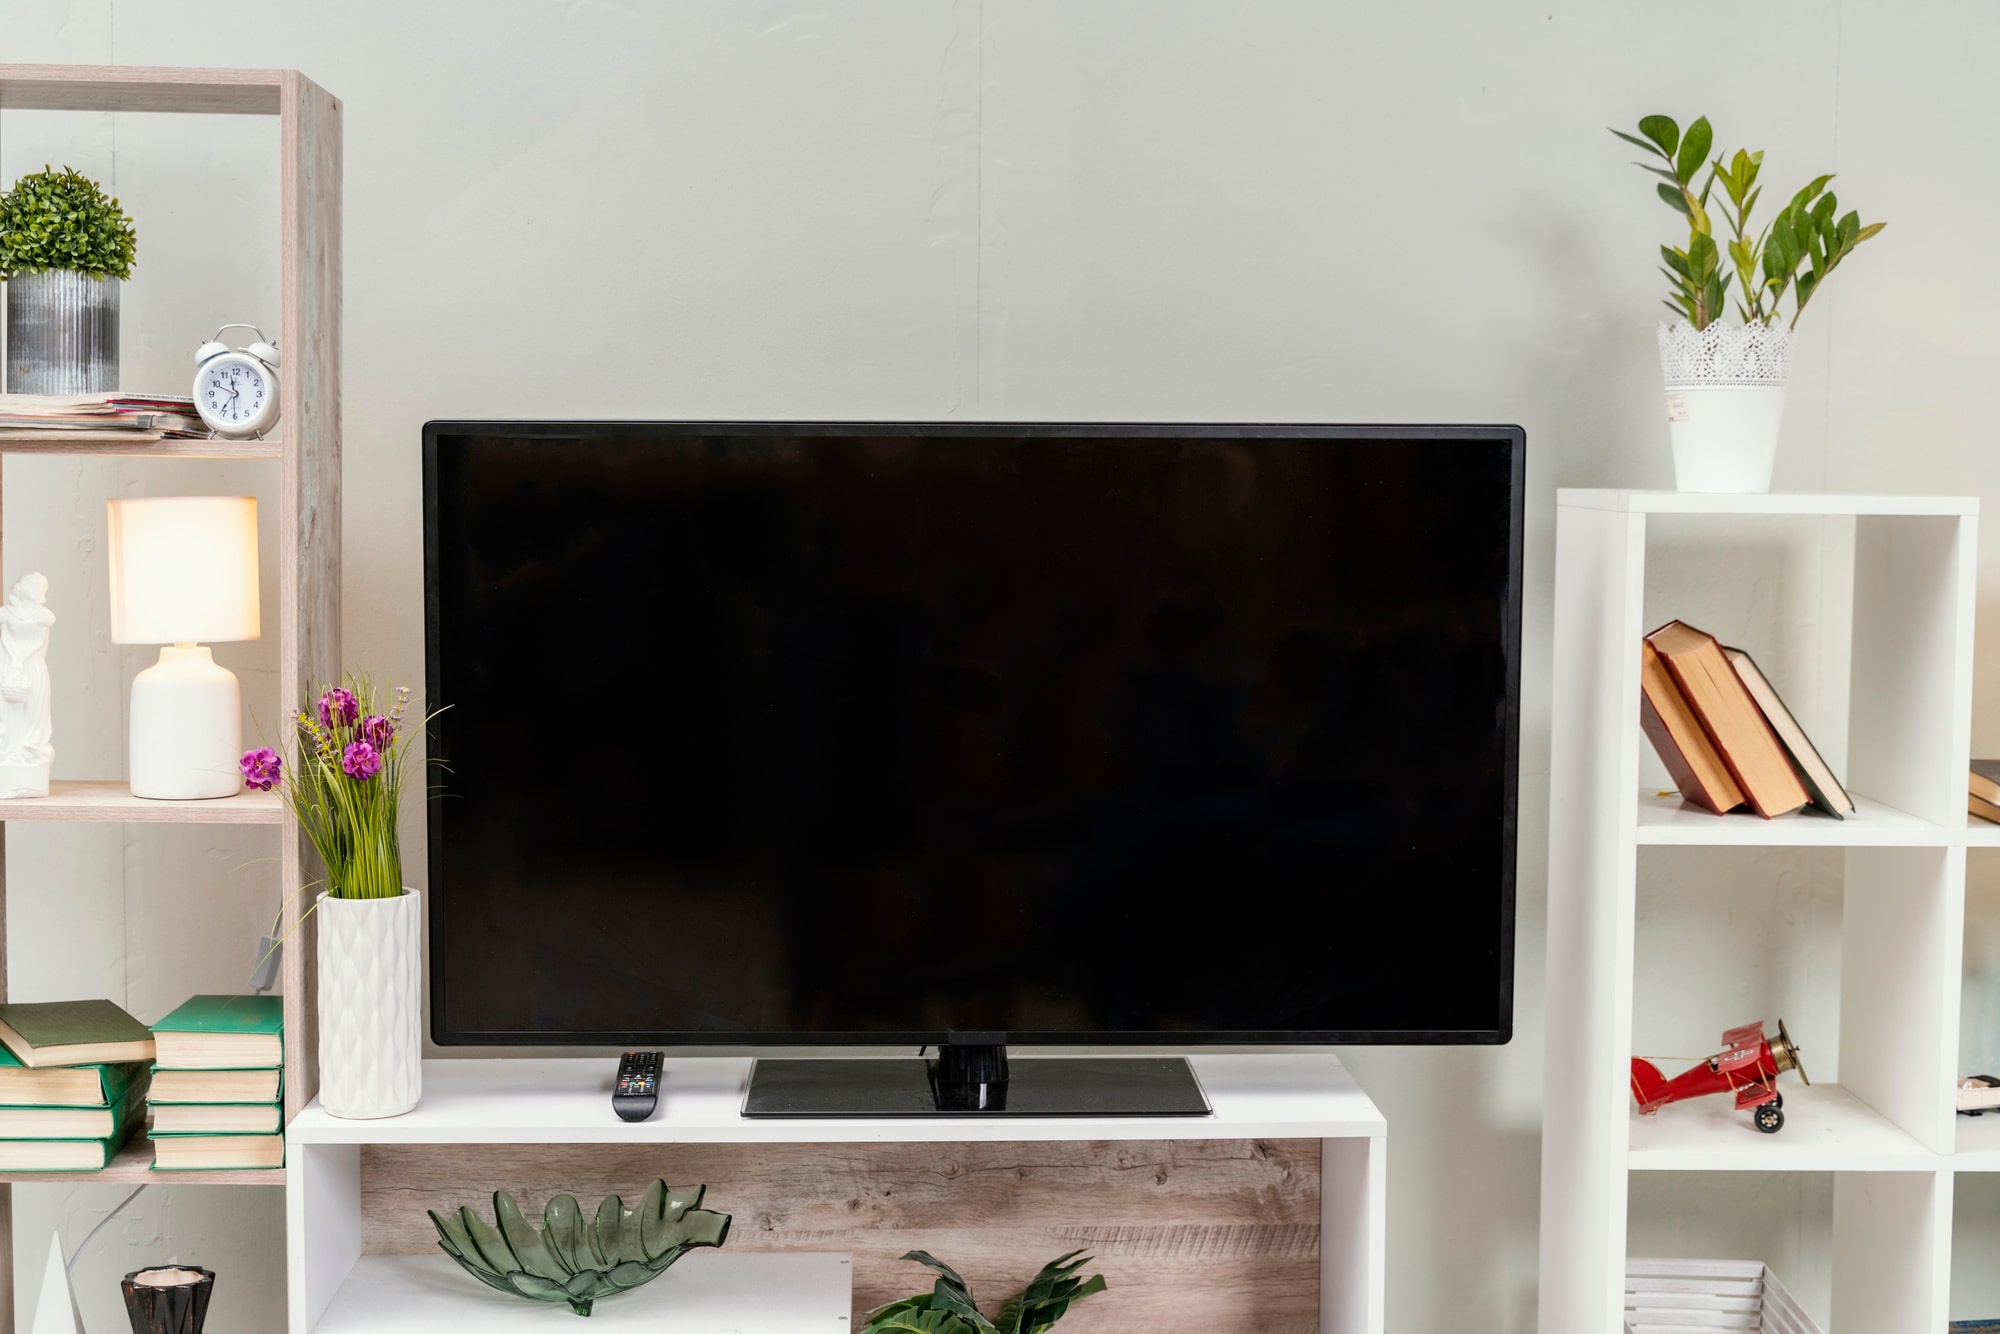 Decorative Accessories For TV Stand